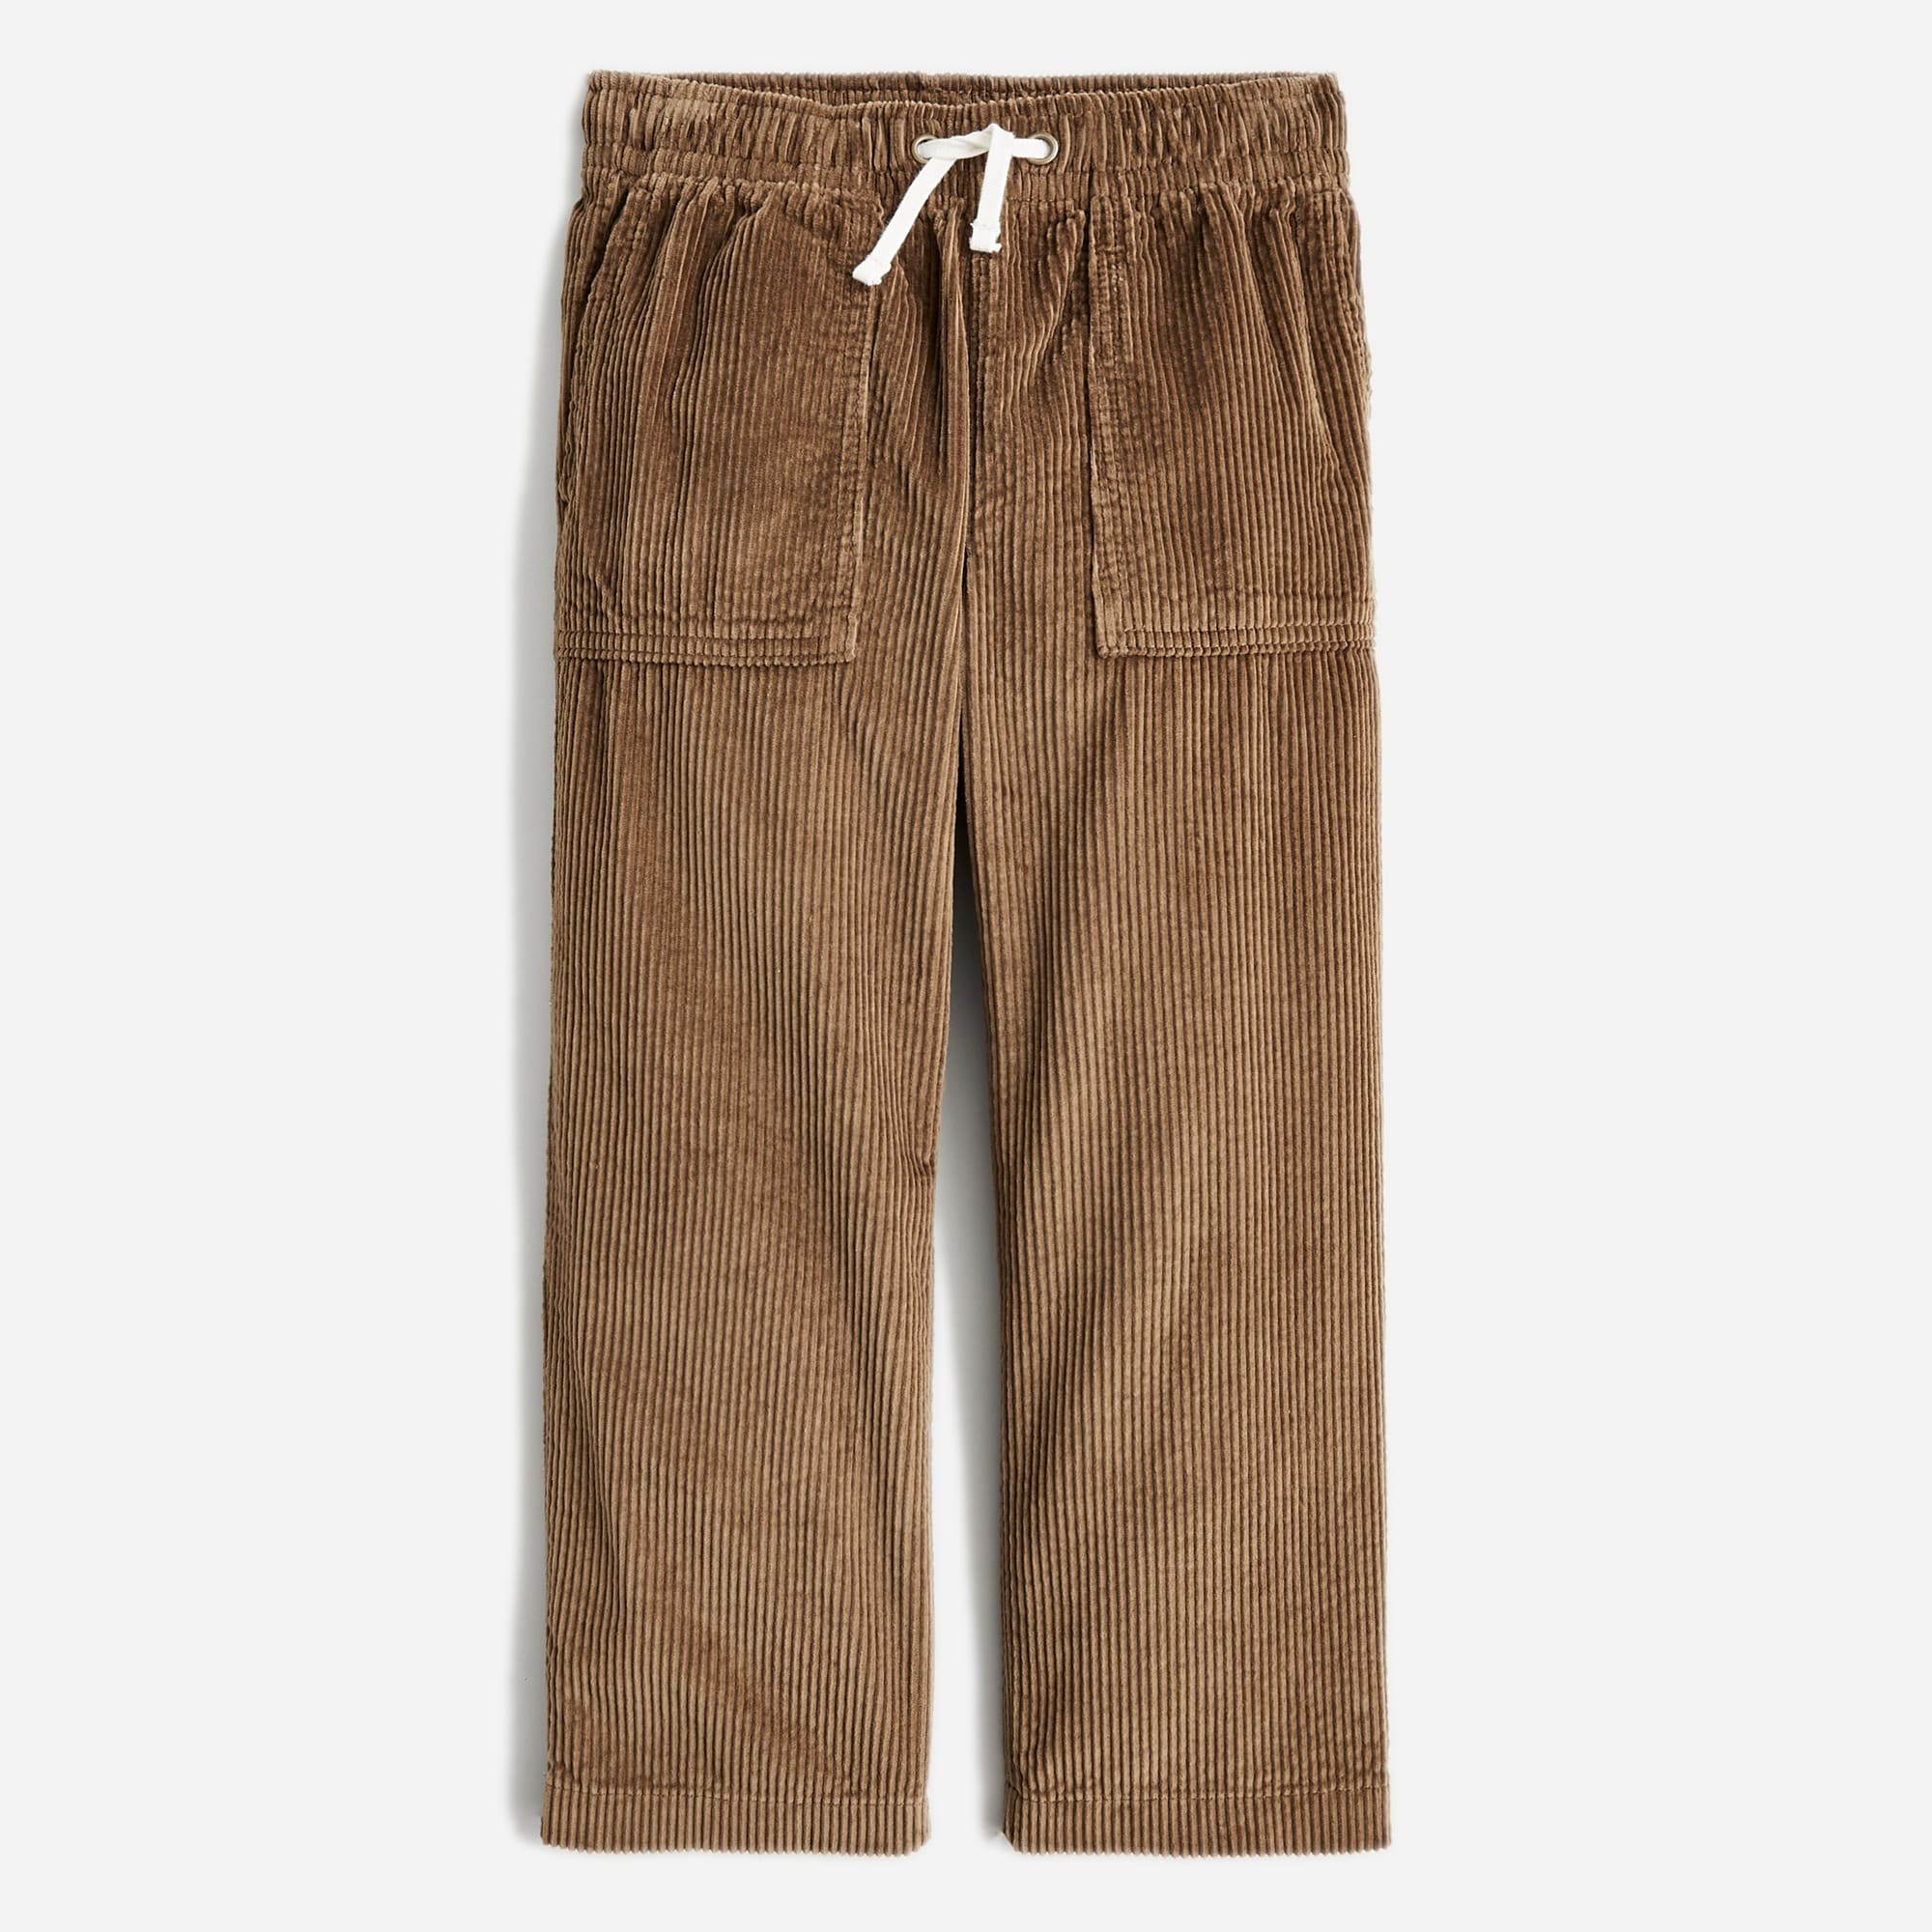 Boys Pull On Corduroy Woven Roll Cuff Pants - Very Merry